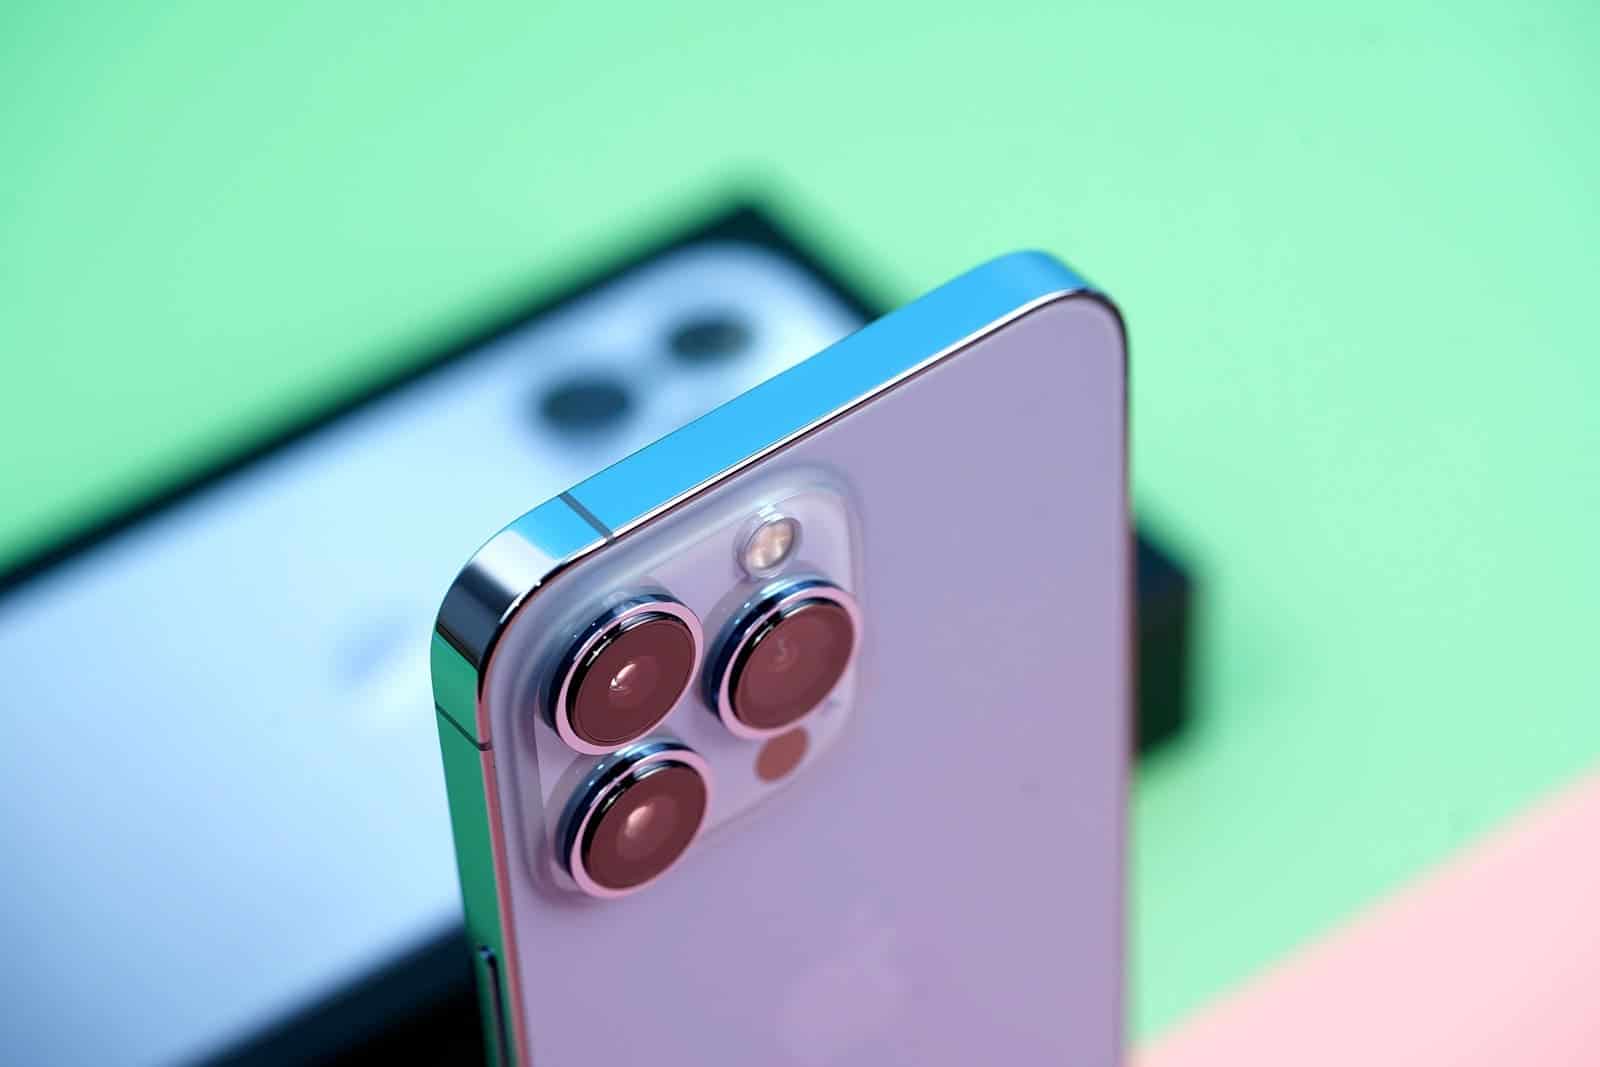 Named the 20 most anticipated smartphones in 2022: there were some surprises